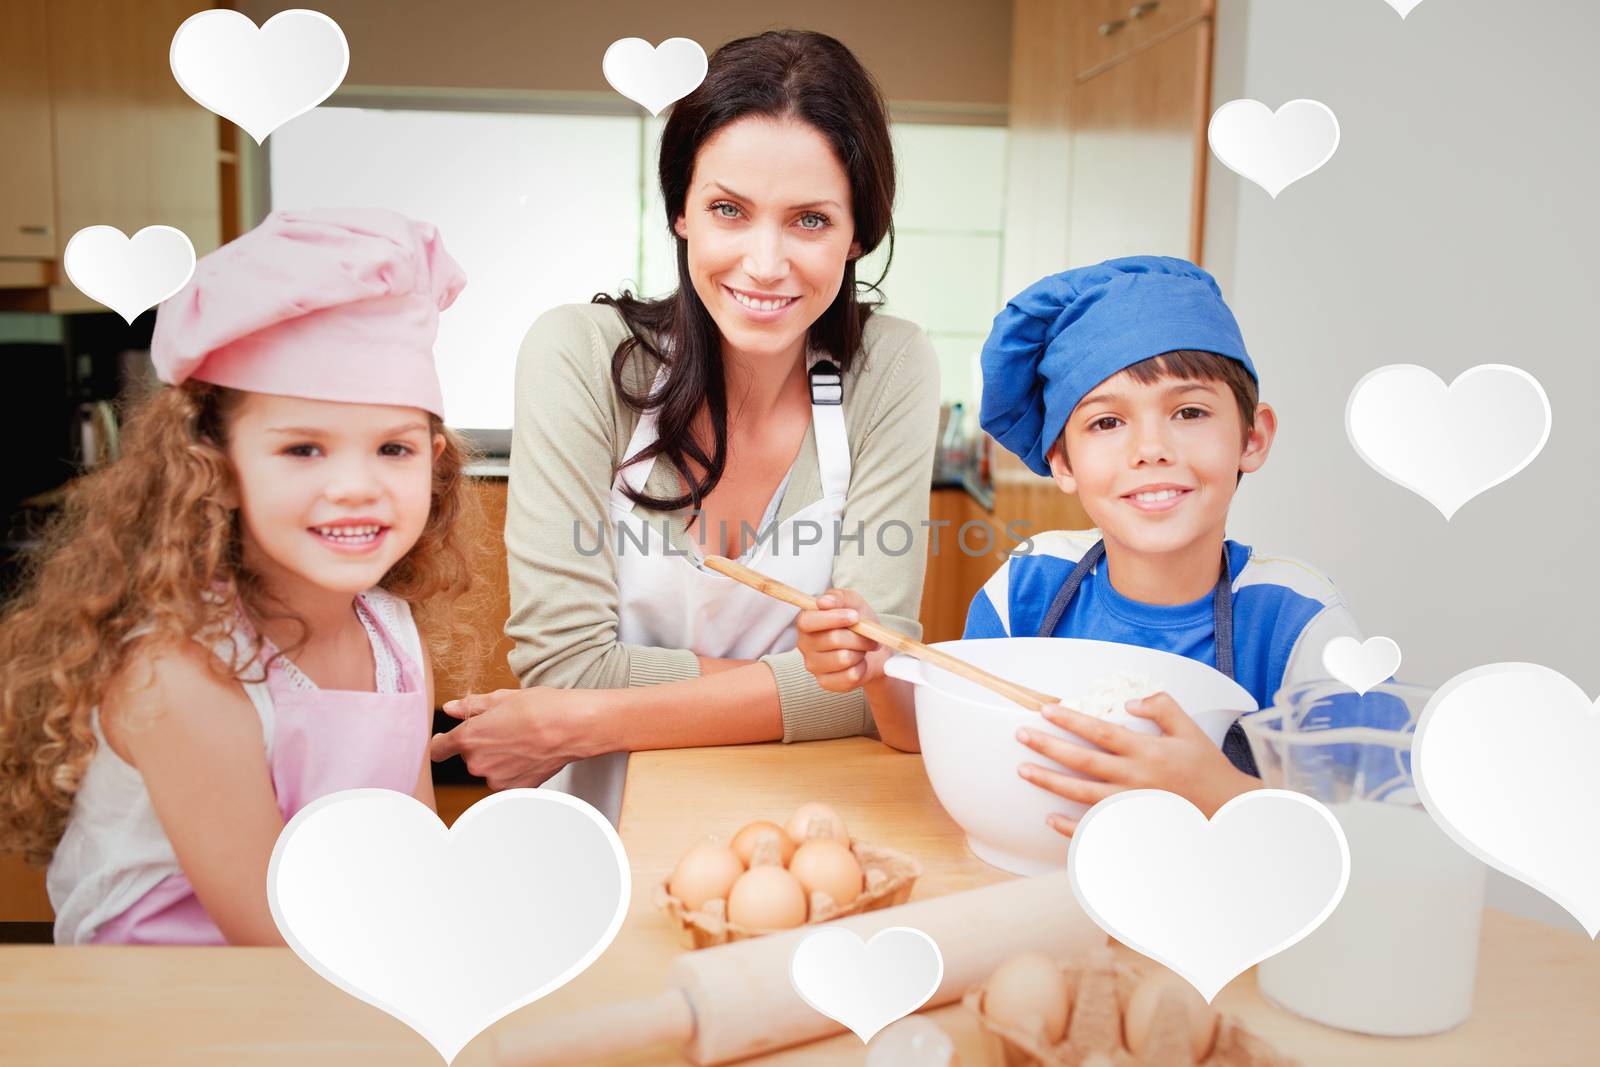 Mother and her children preparing cake against cute hearts